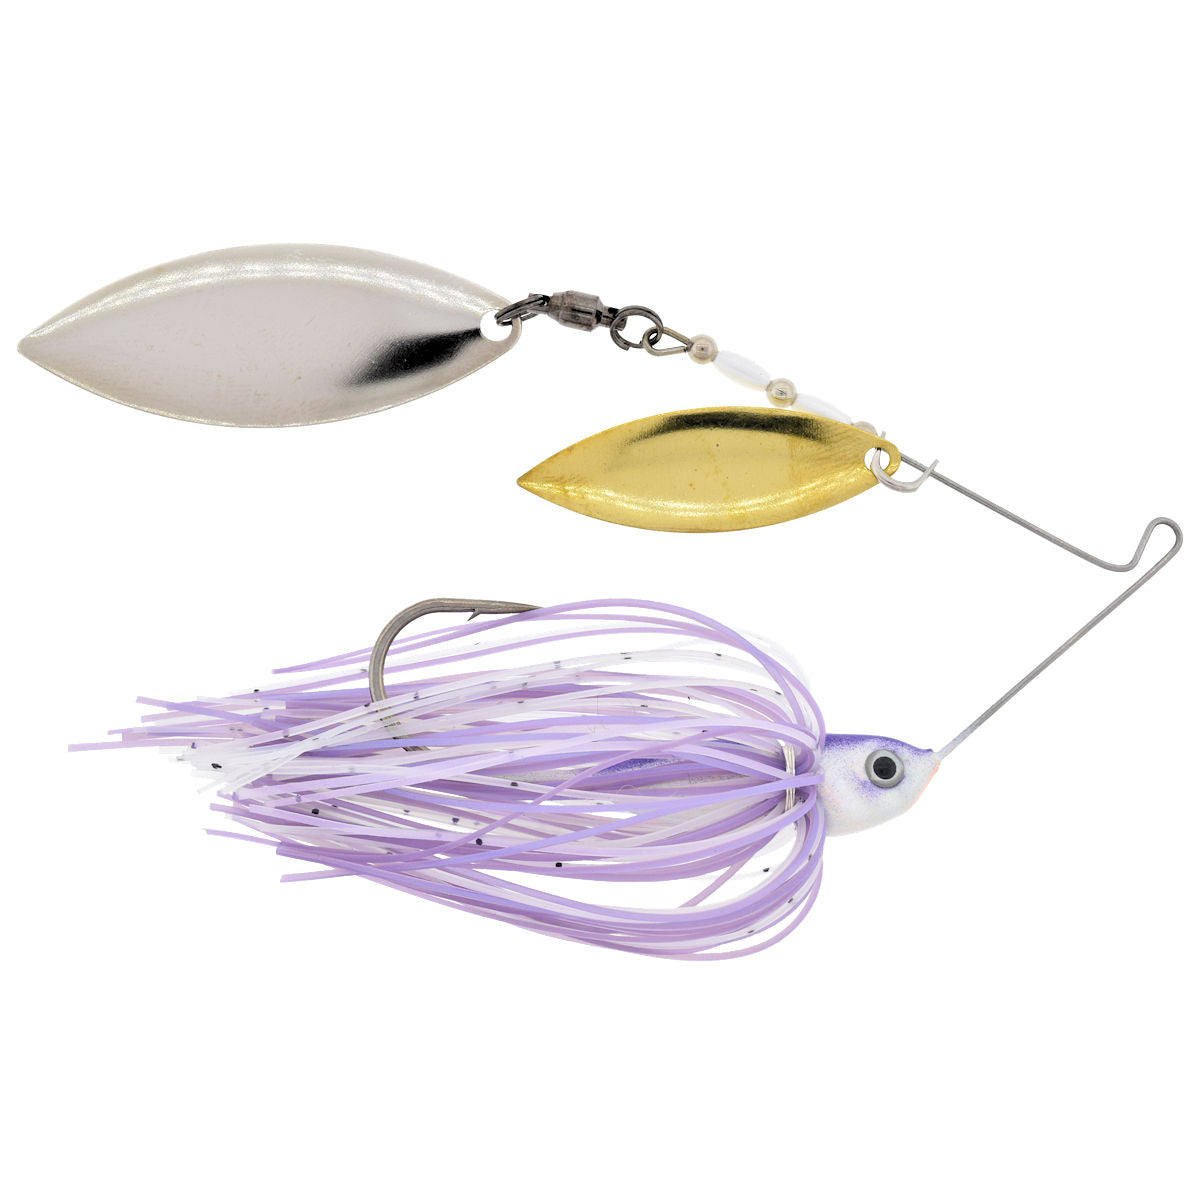 Glimmer Series Double Willow Spinnerbait_Purple Shad Gold/Silver